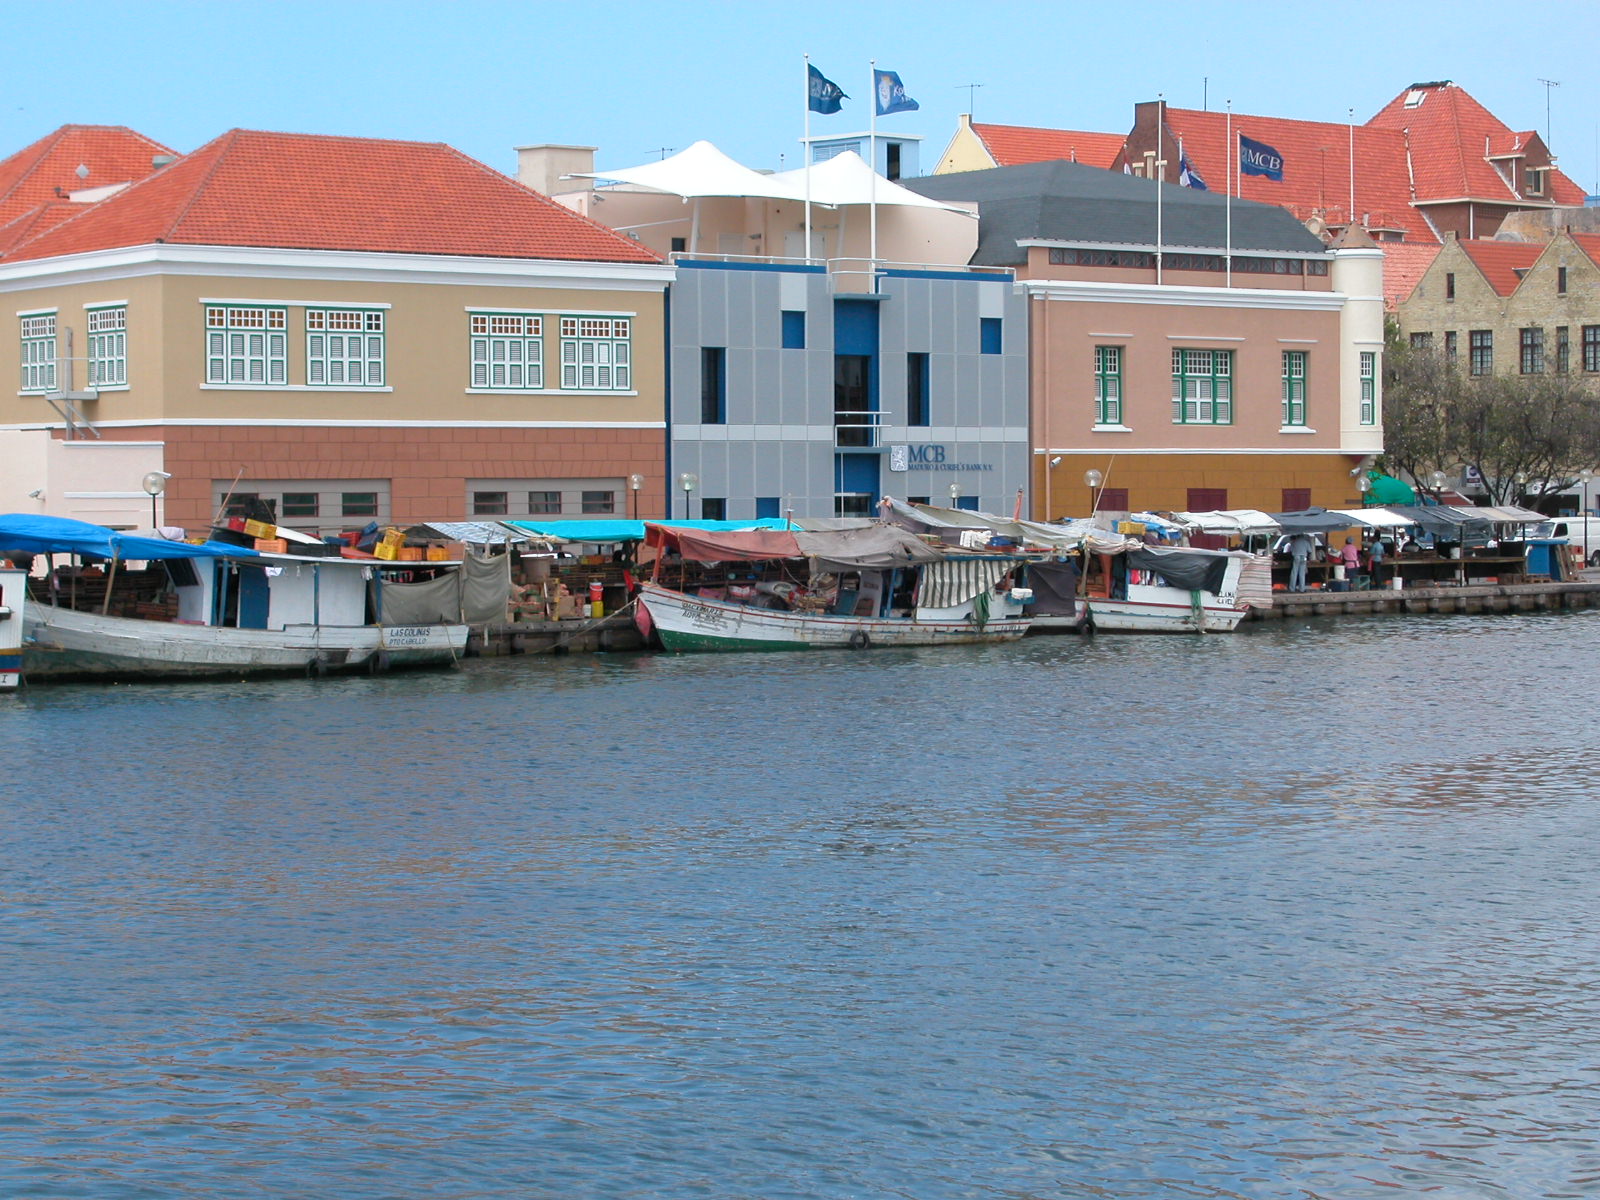 architecture exteriors willemstad curacao jacco water boats quay market river city buildings